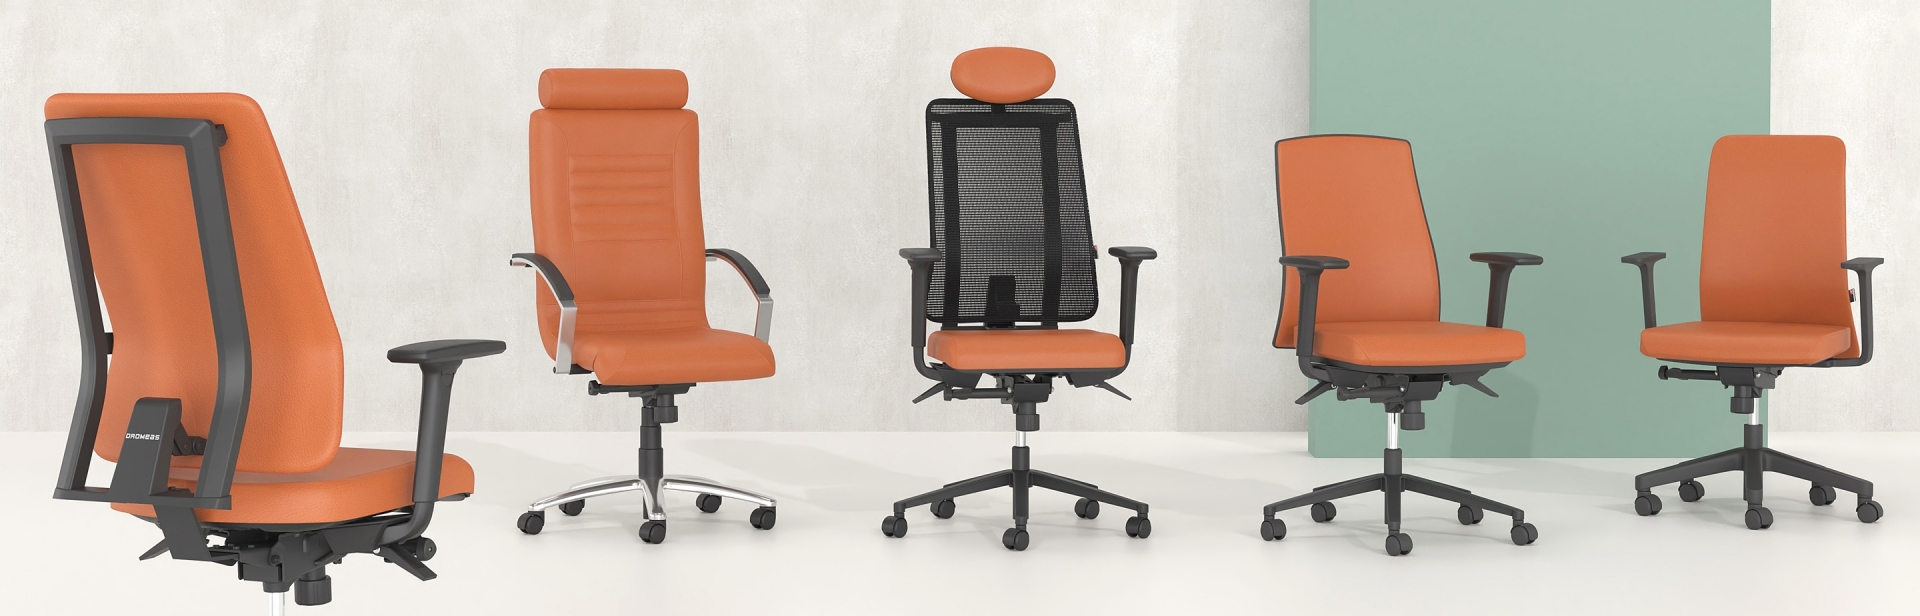 Anatomical and Ergonomic Office Chairs | Dromeas e-shop